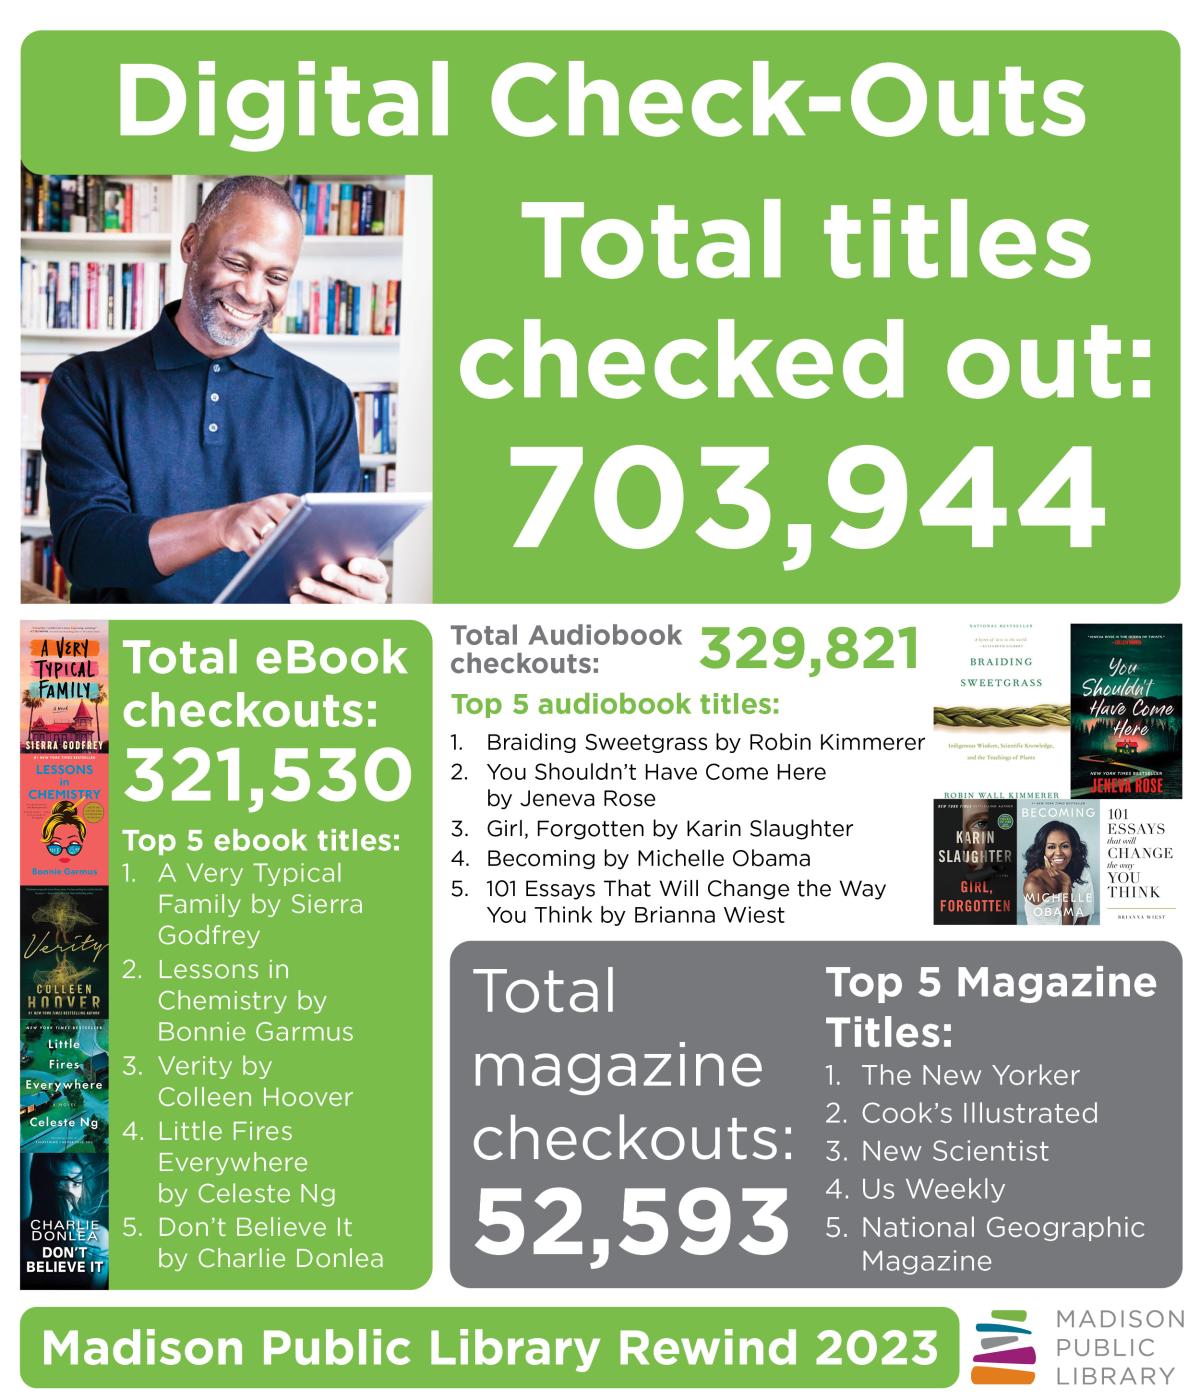 Madison Public Library Year in Review 2023 Digital Checkout Numbers